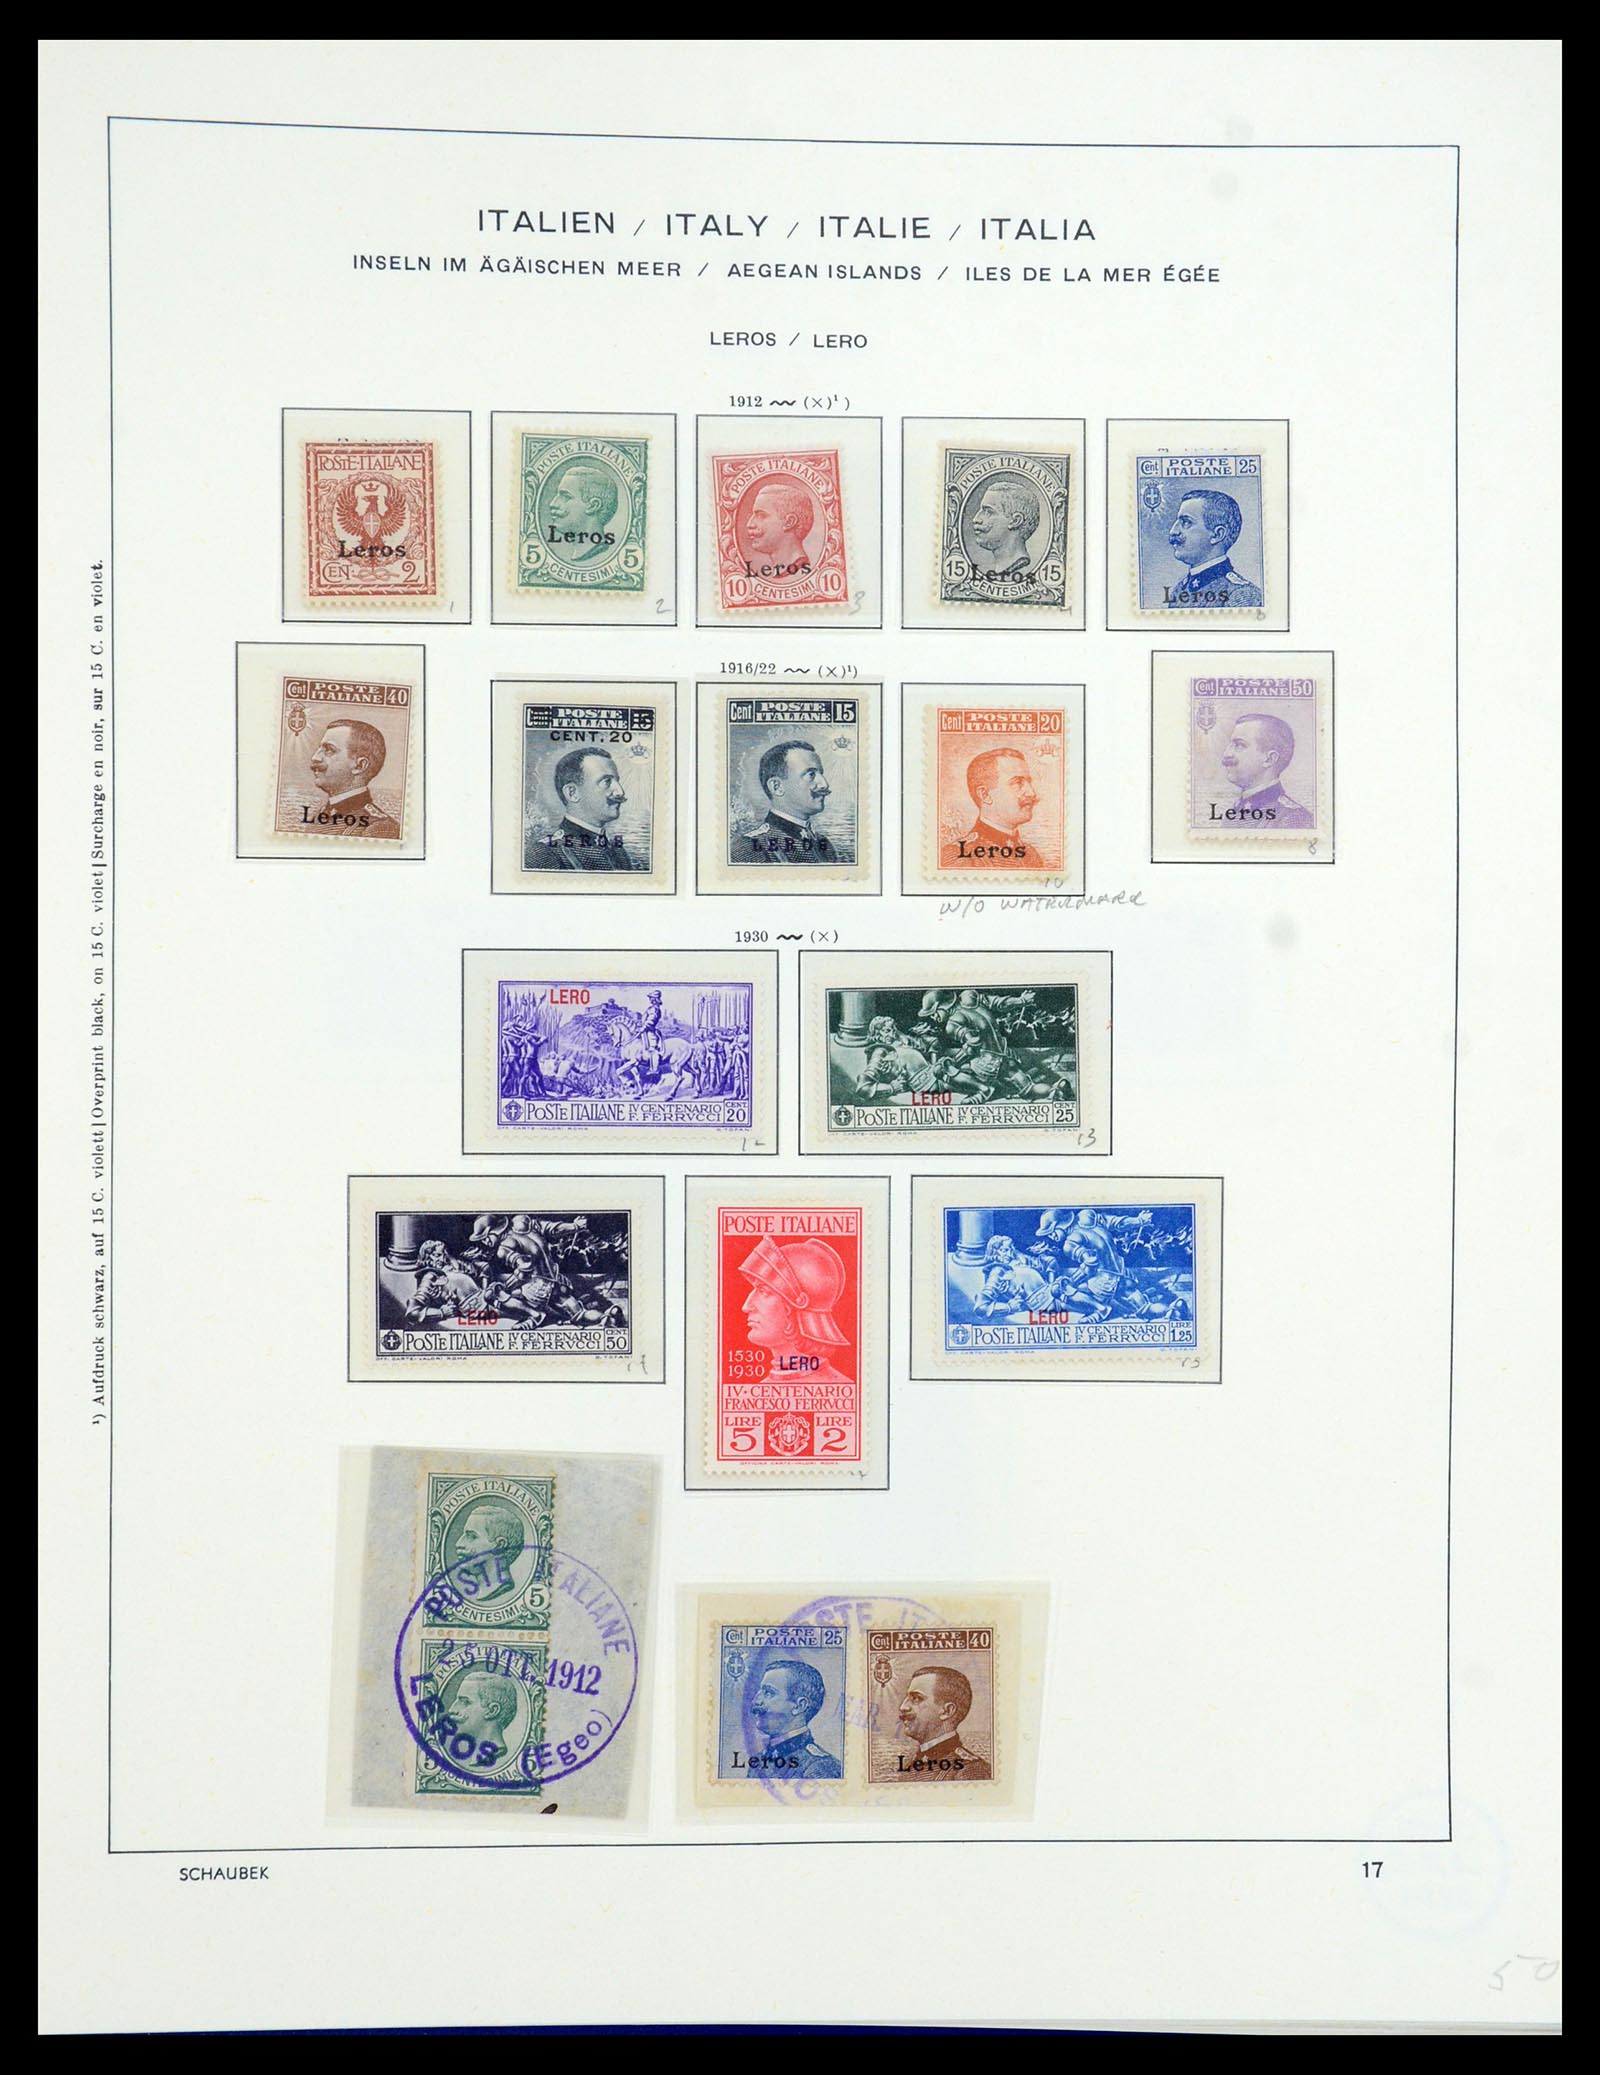 36181 021 - Stamp collection 36181 Italian Aegean Islands 1912-1941.